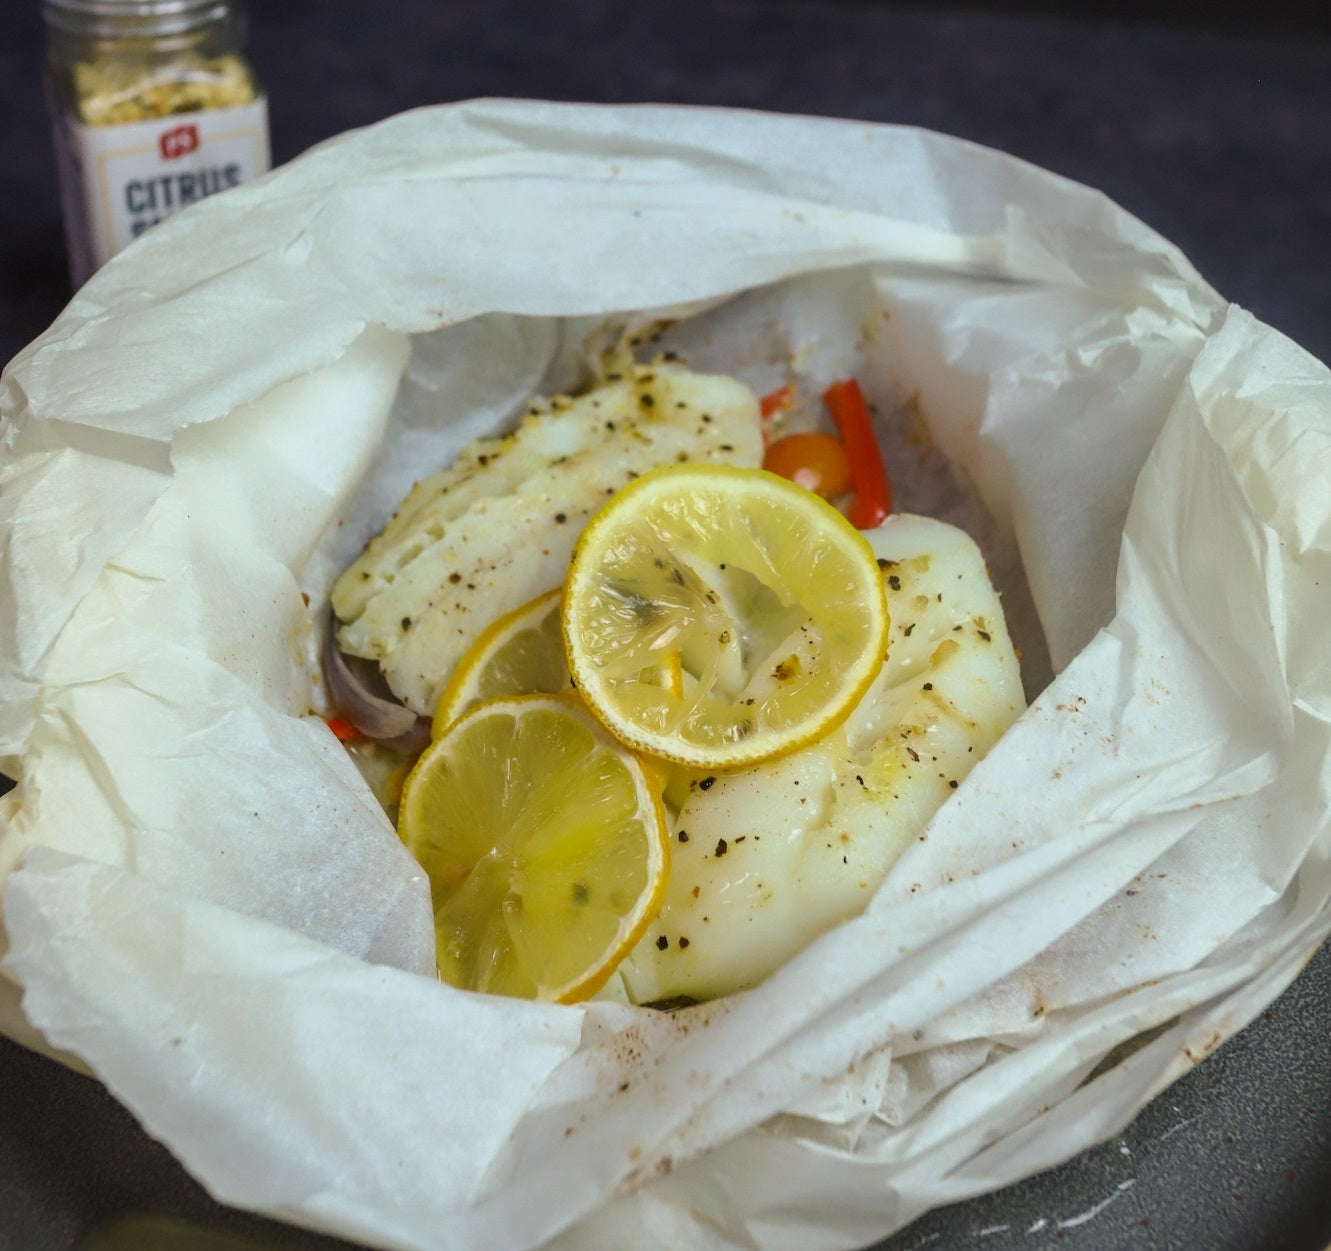 Mediterranean Salmon Baked In Parchment (En Papillote) - Recipes